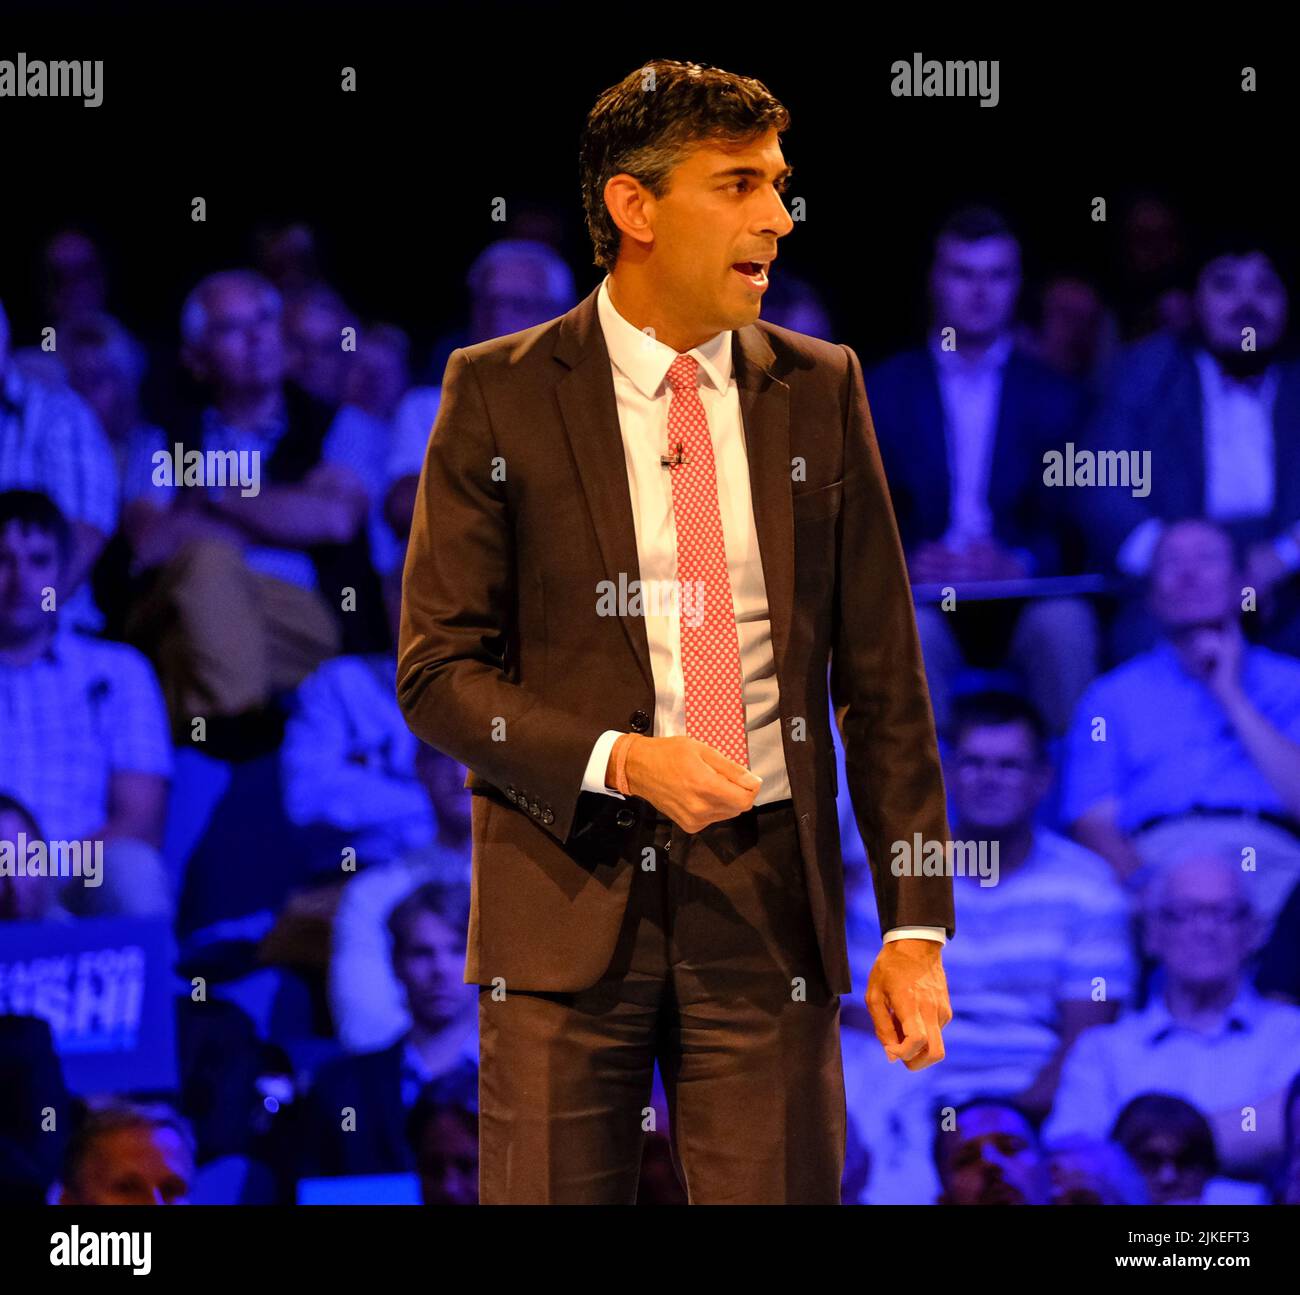 Exeter Devon UK.2nd Conservative Party Hustings. Tory members gathered in the Great Hall at Exeter University.Rishi Sunak mp puts his case forward for the leadership job. Credit: charlie bryan/Alamy Live News Stock Photo